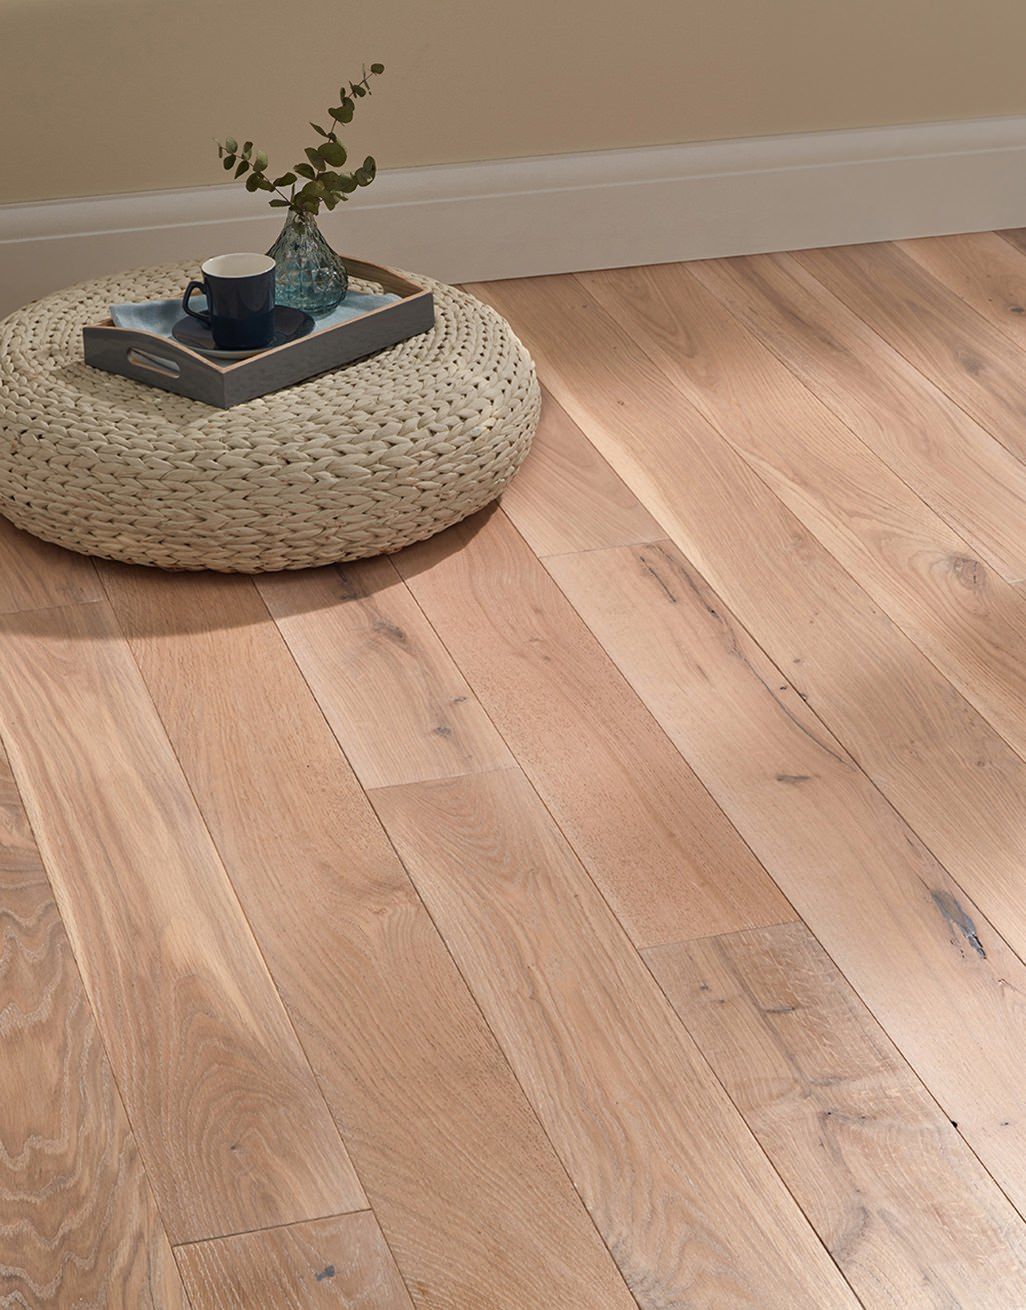 Deluxe Frosted Oak Solid Wood Flooring, Tile To Wood Transition Strip B Q